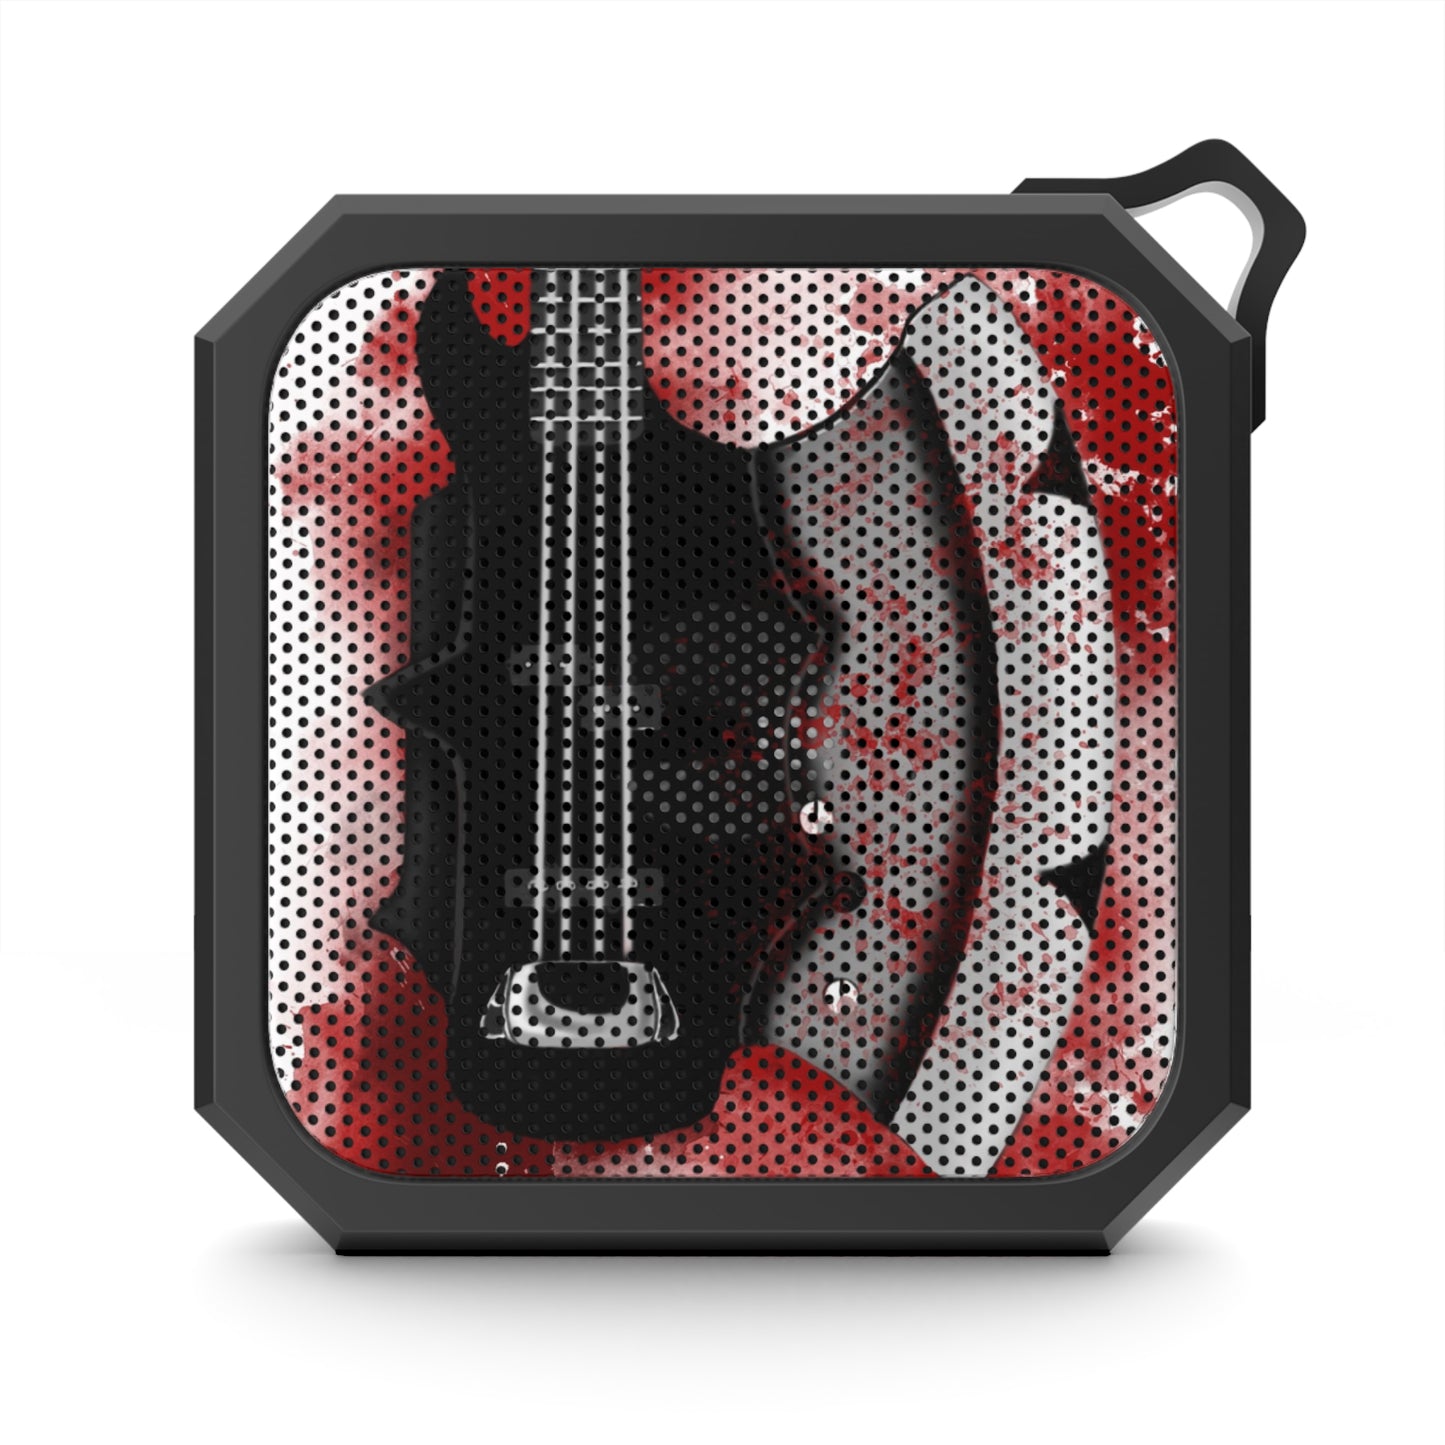 Digital painting of an axe bass guitar printed on a bluetooth speaker